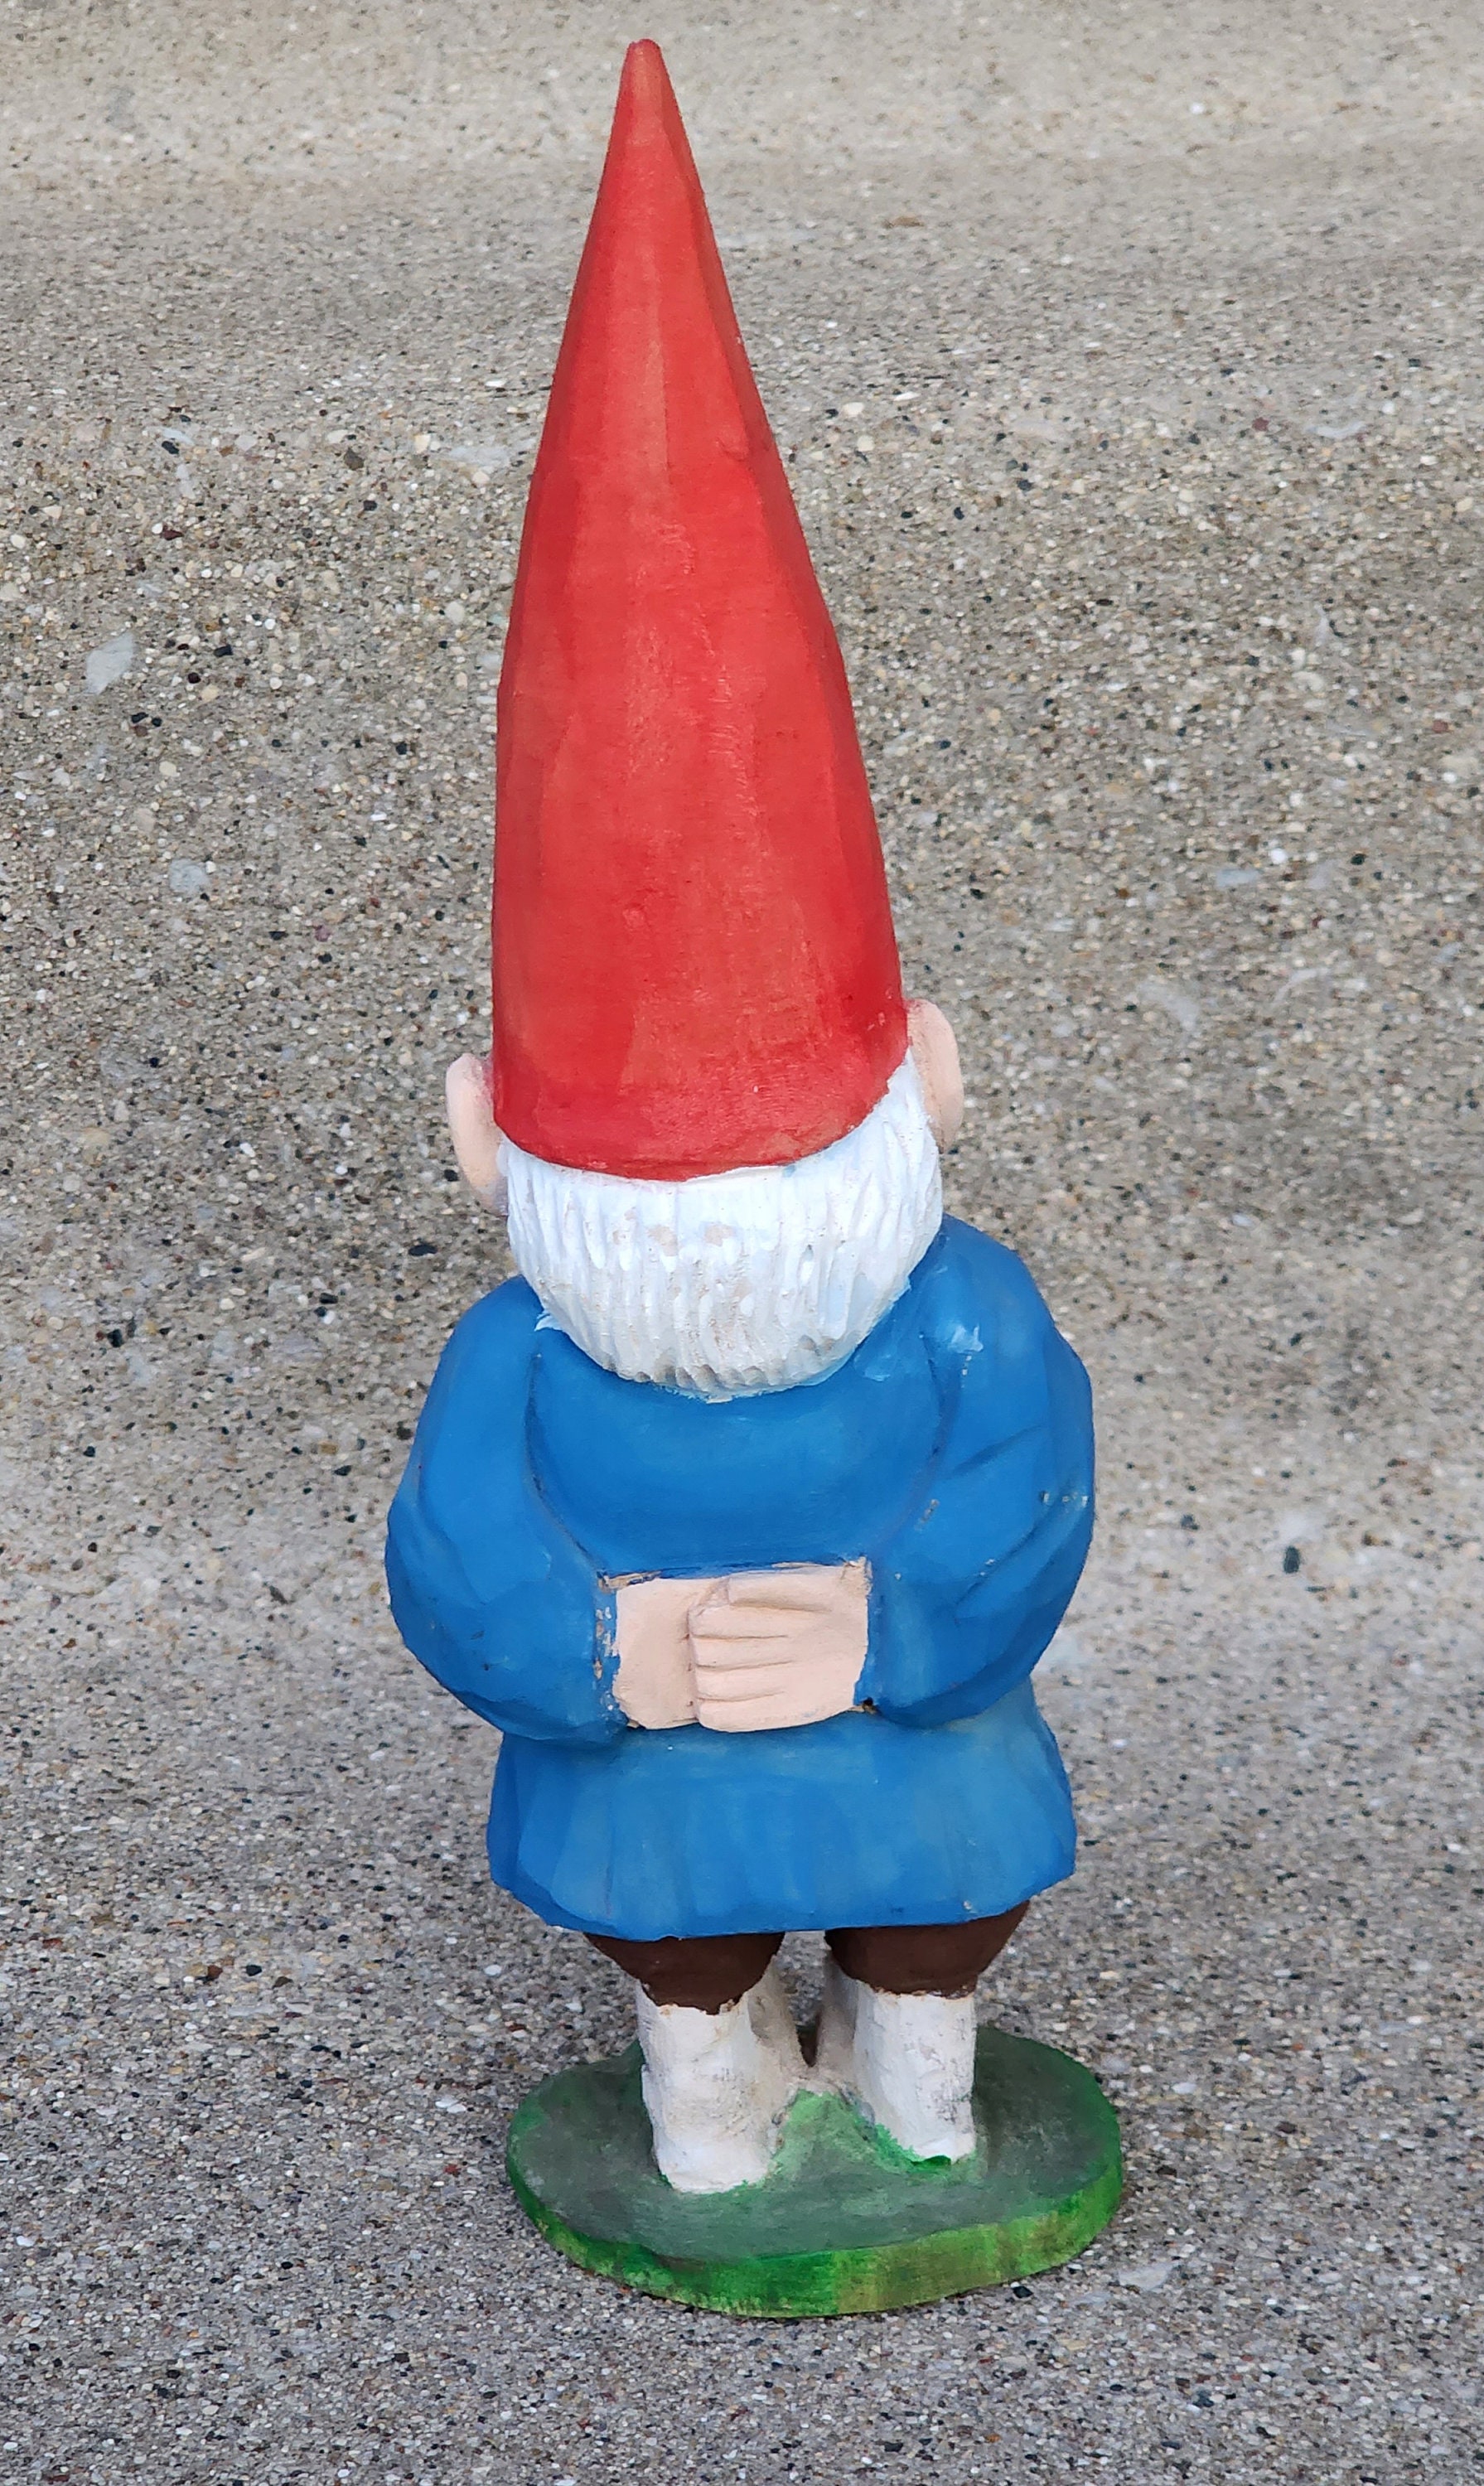 Vintage Red Hat Roaming Gnome Santa Father Time Wizard Beard Blue Jacket  Hand Painted Carved Wood 1993 Lumear Netolicky Figurine Statue -  Sweden